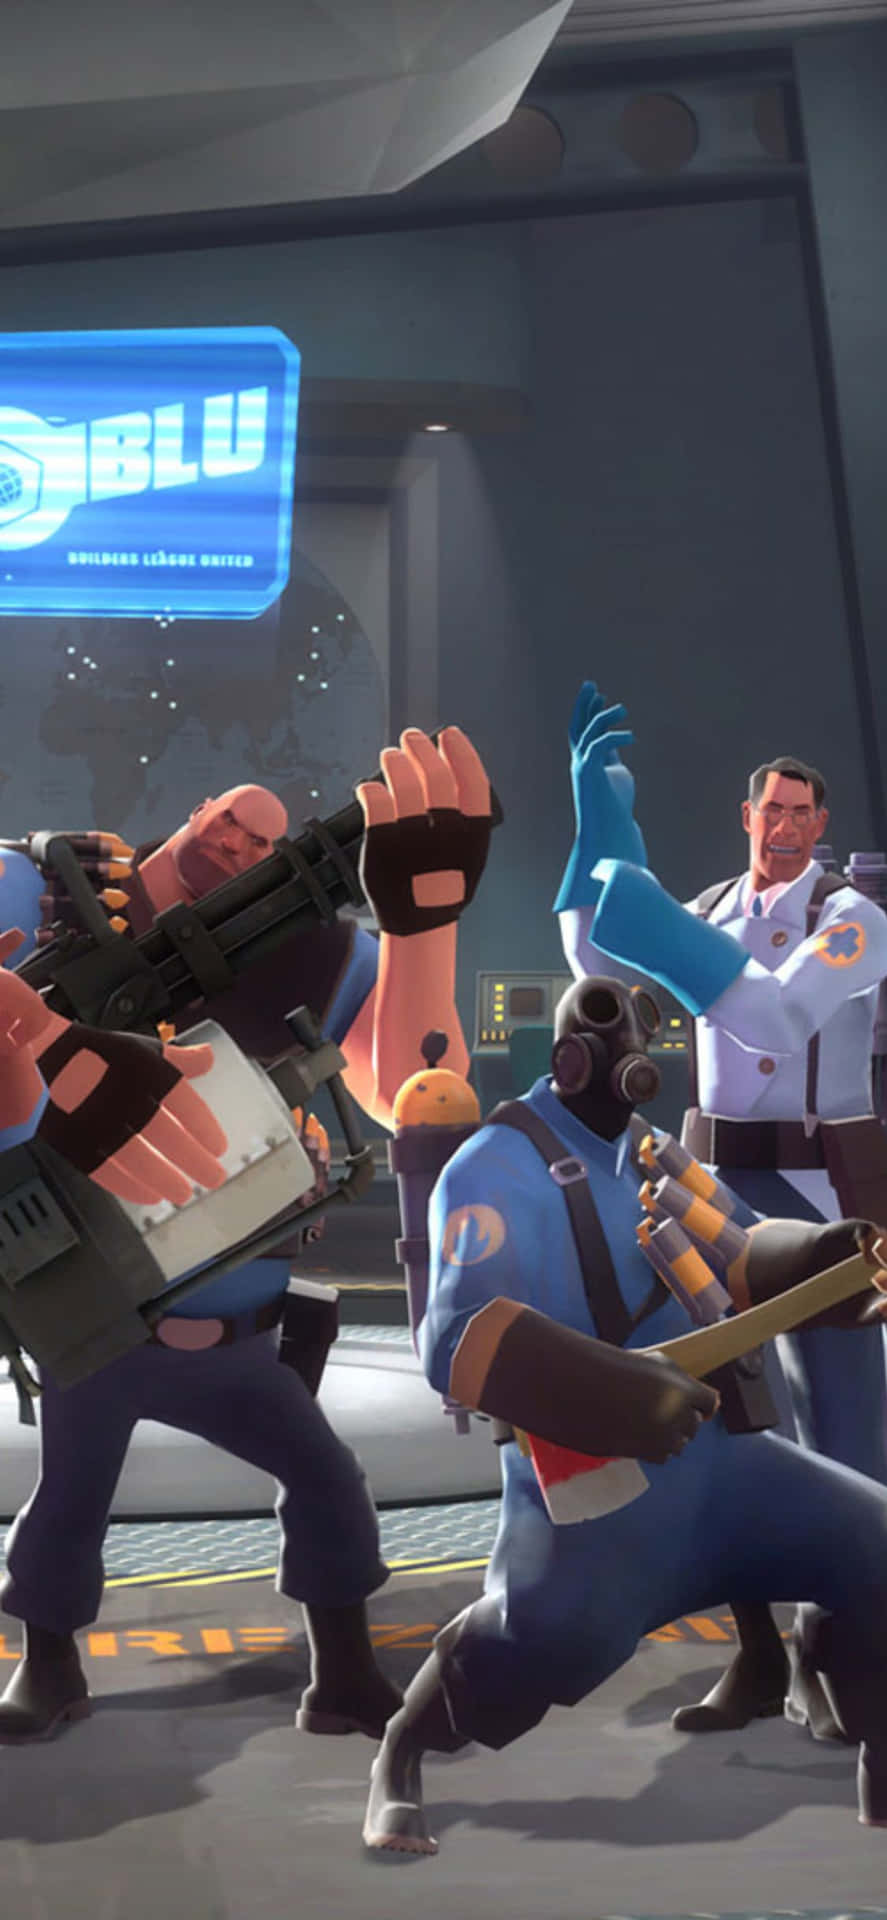 iPhone XS Team Fortress 2 Funny Background